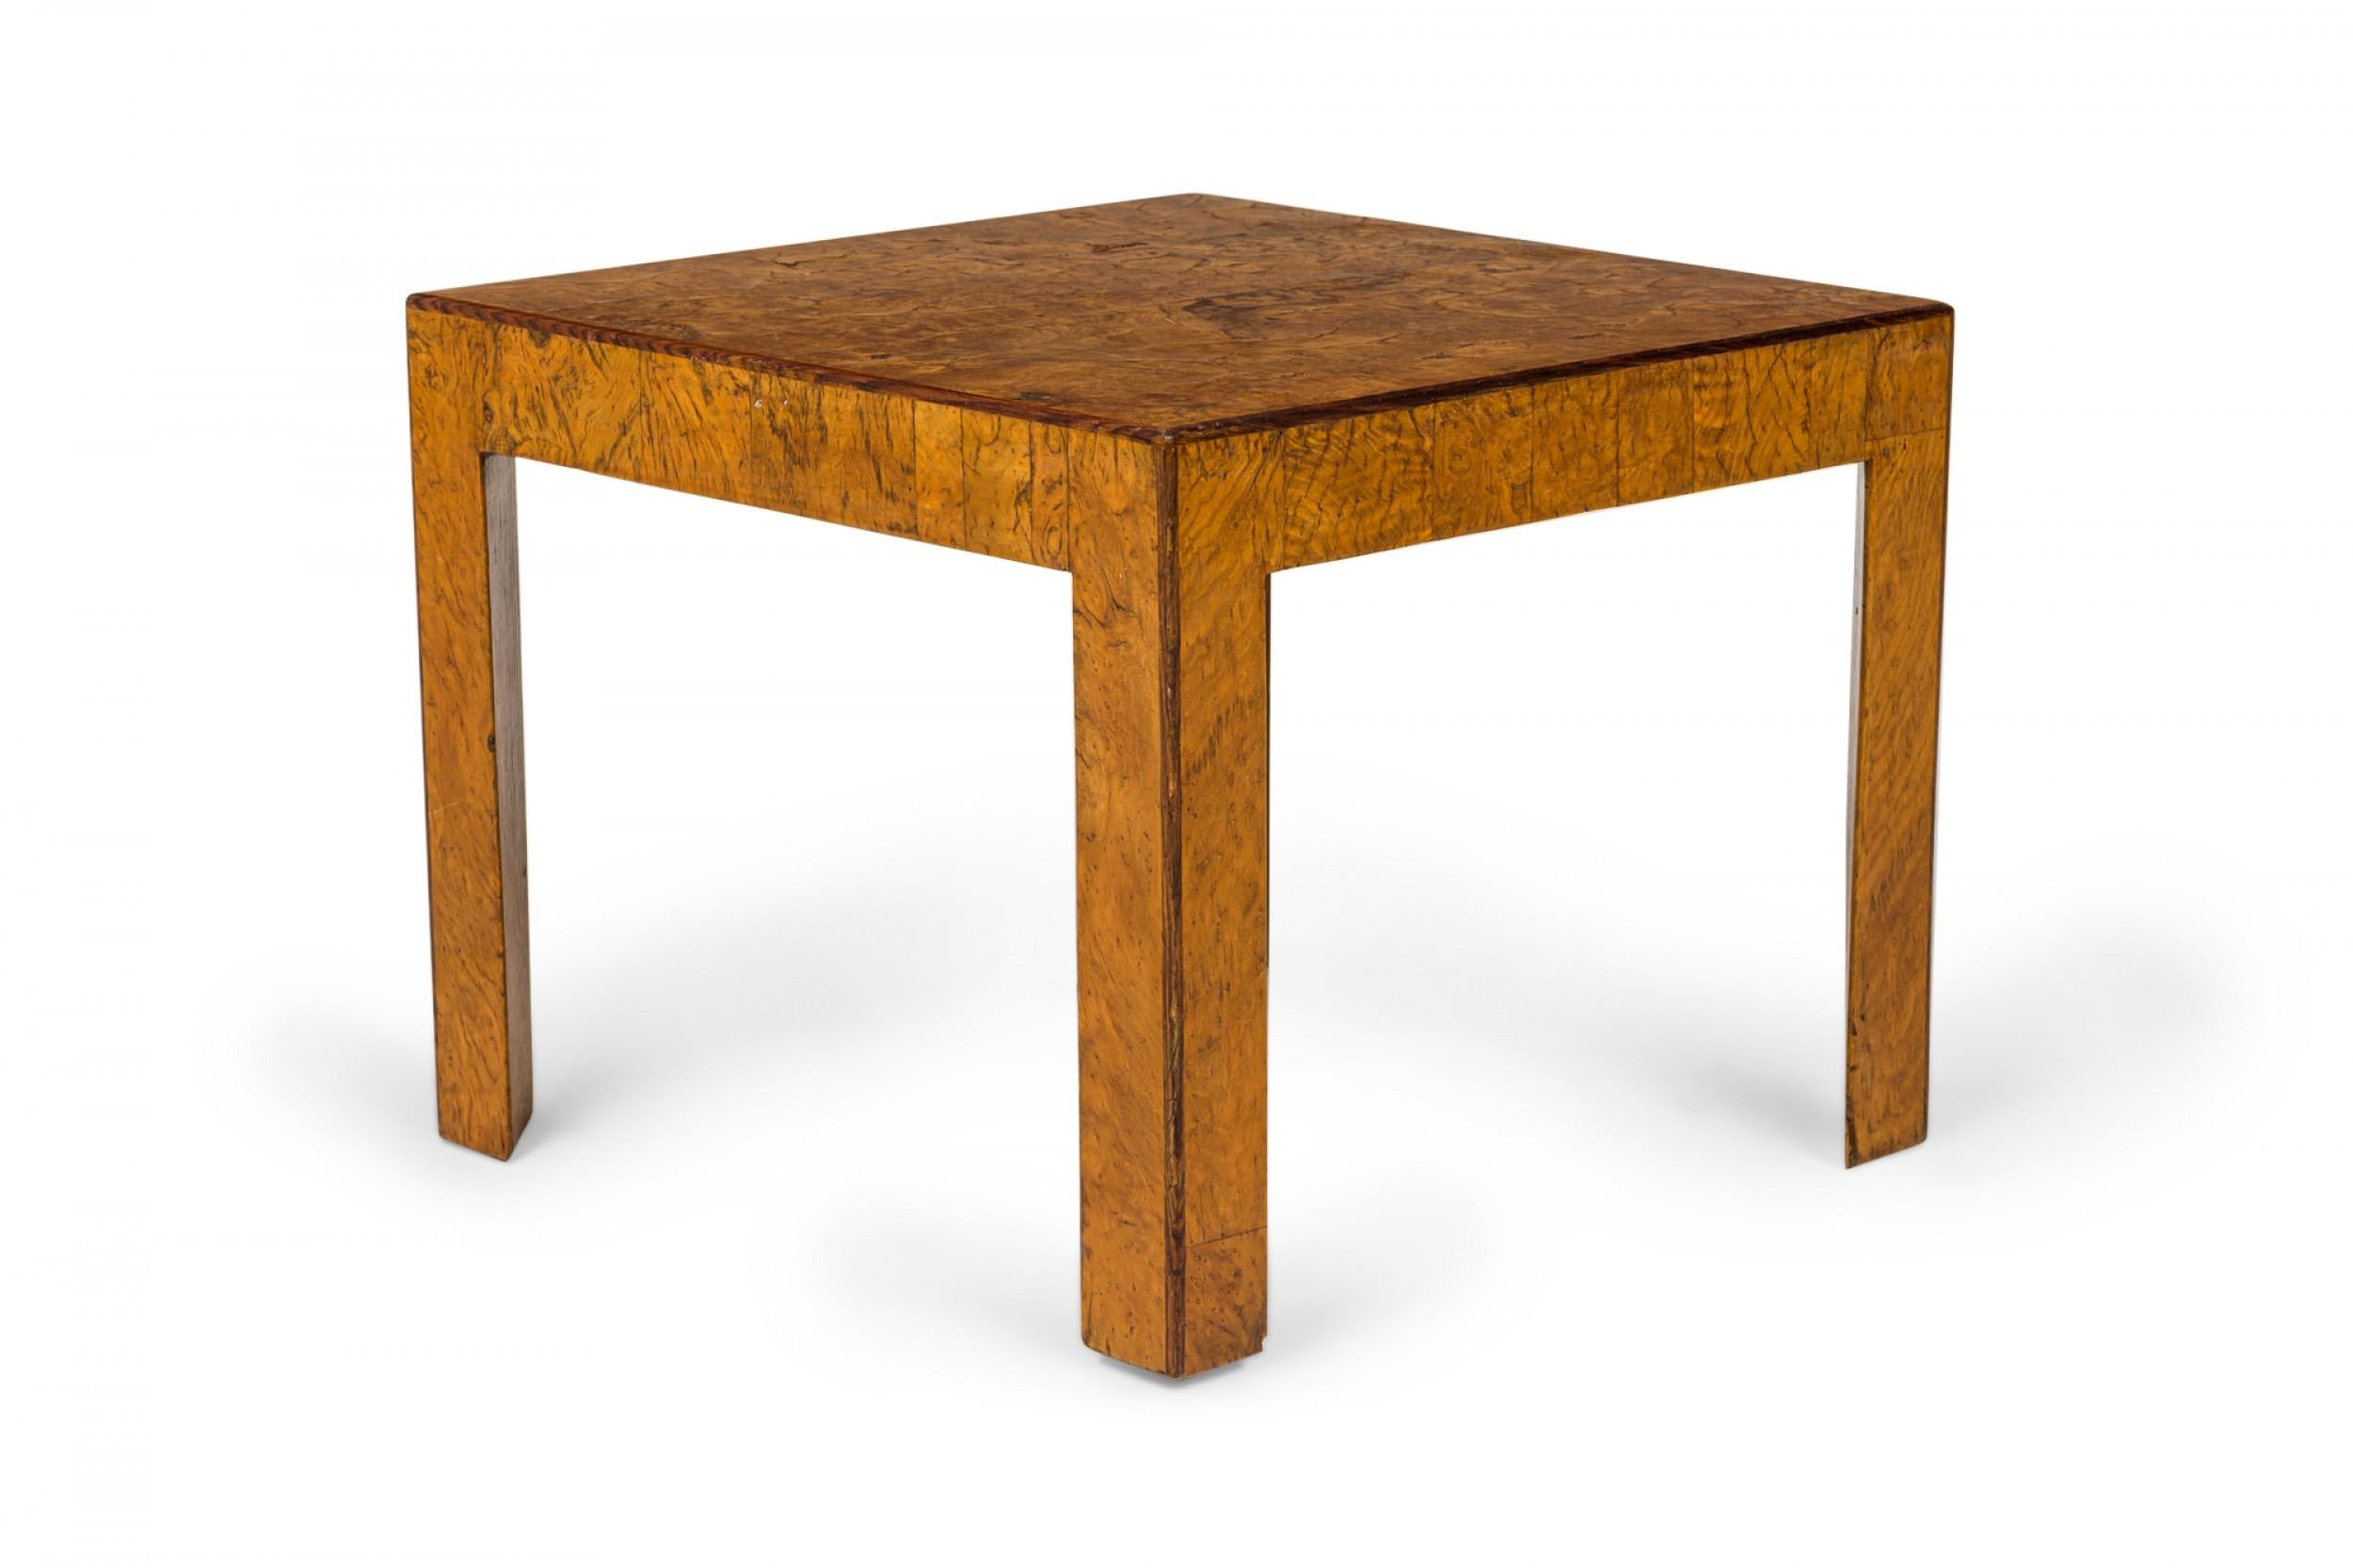 Italian Mid-Century square end / side table with oyster burl veneer.